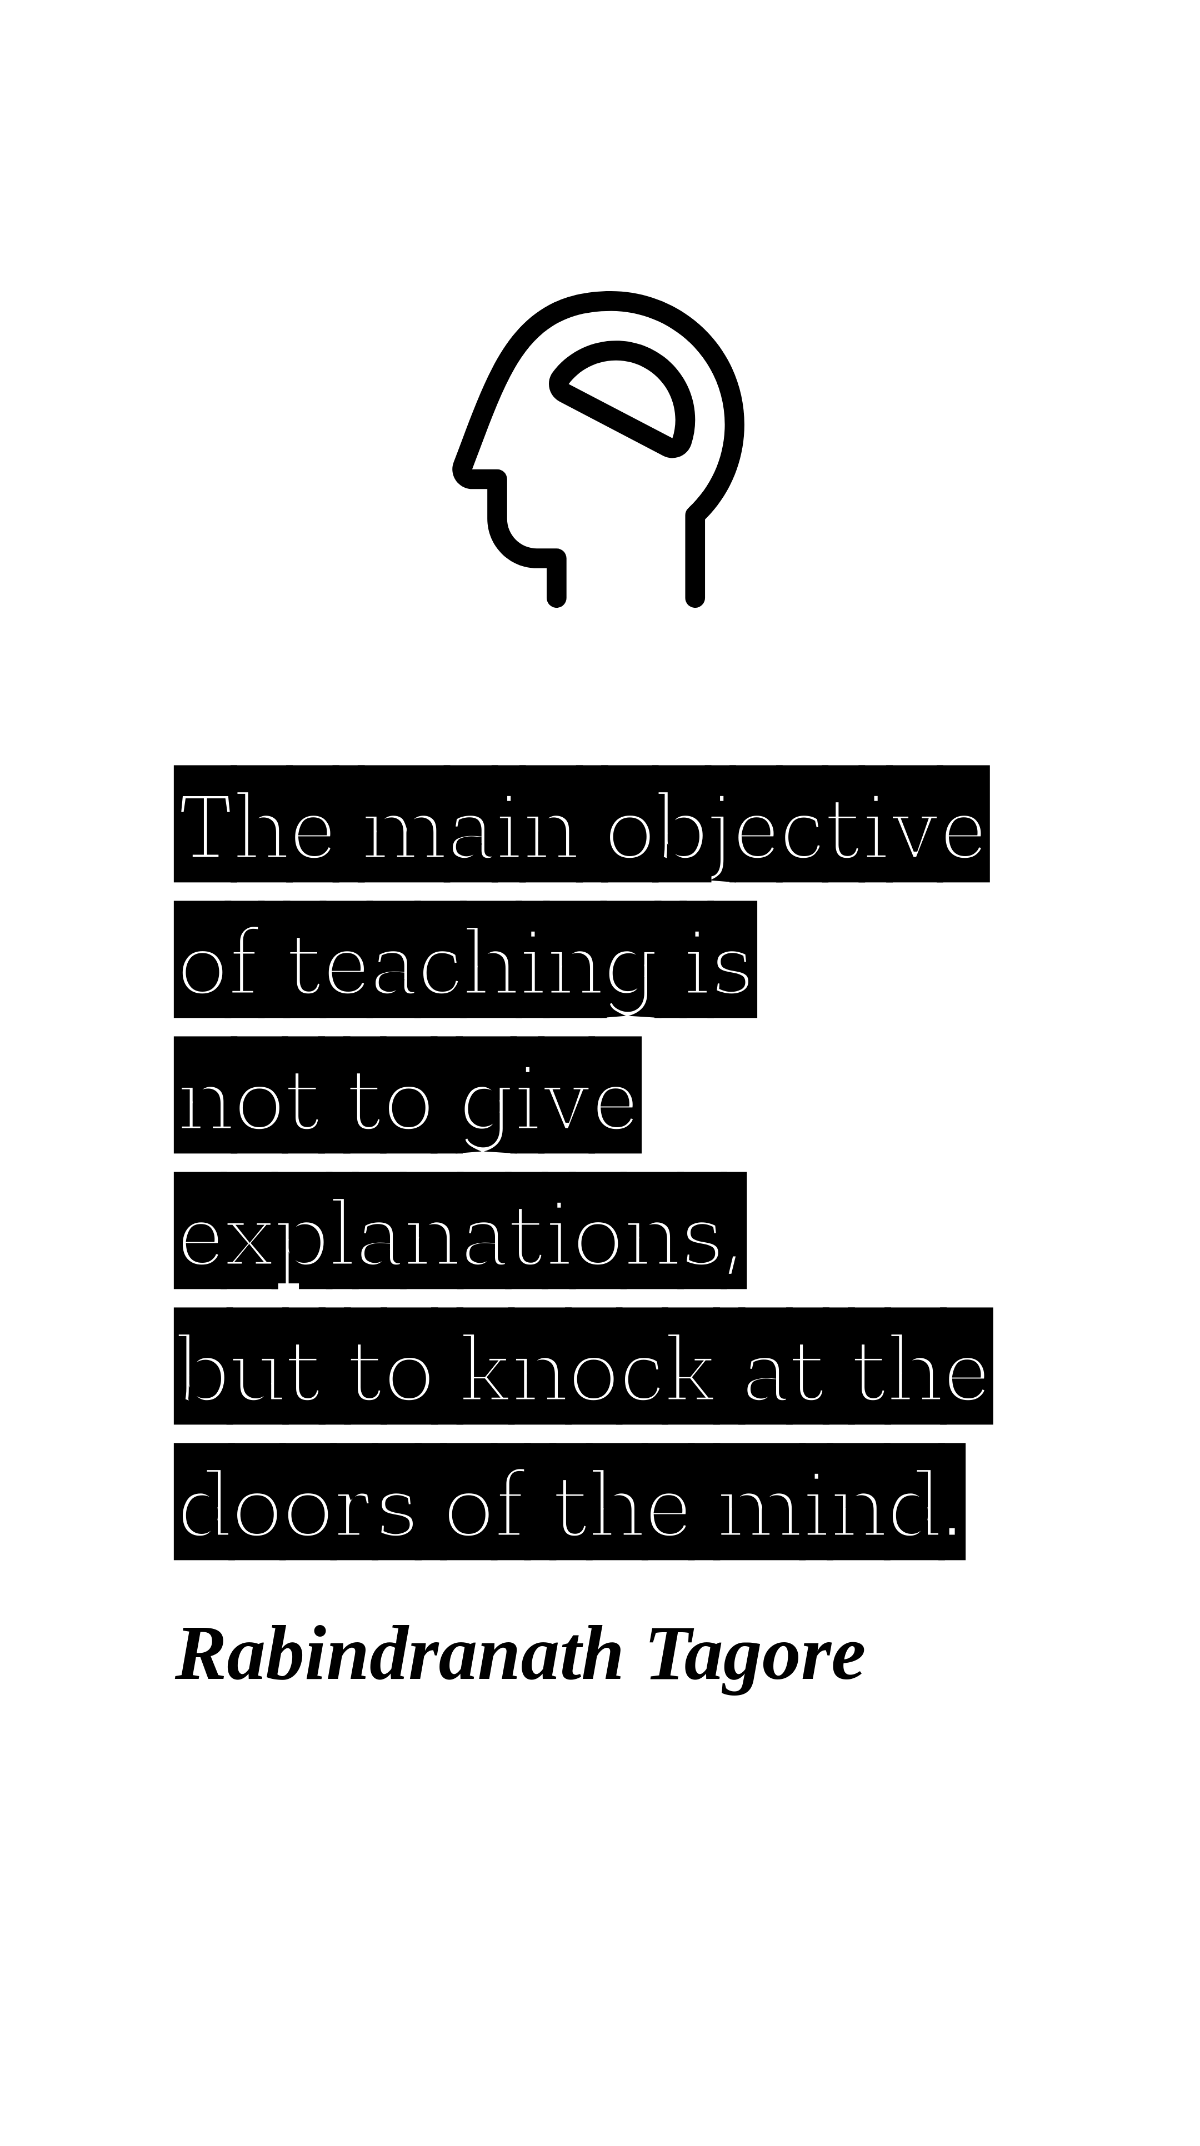 Rabindranath Tagore - The main objective of teaching is not to give explanations, but to knock at the doors of the mind.